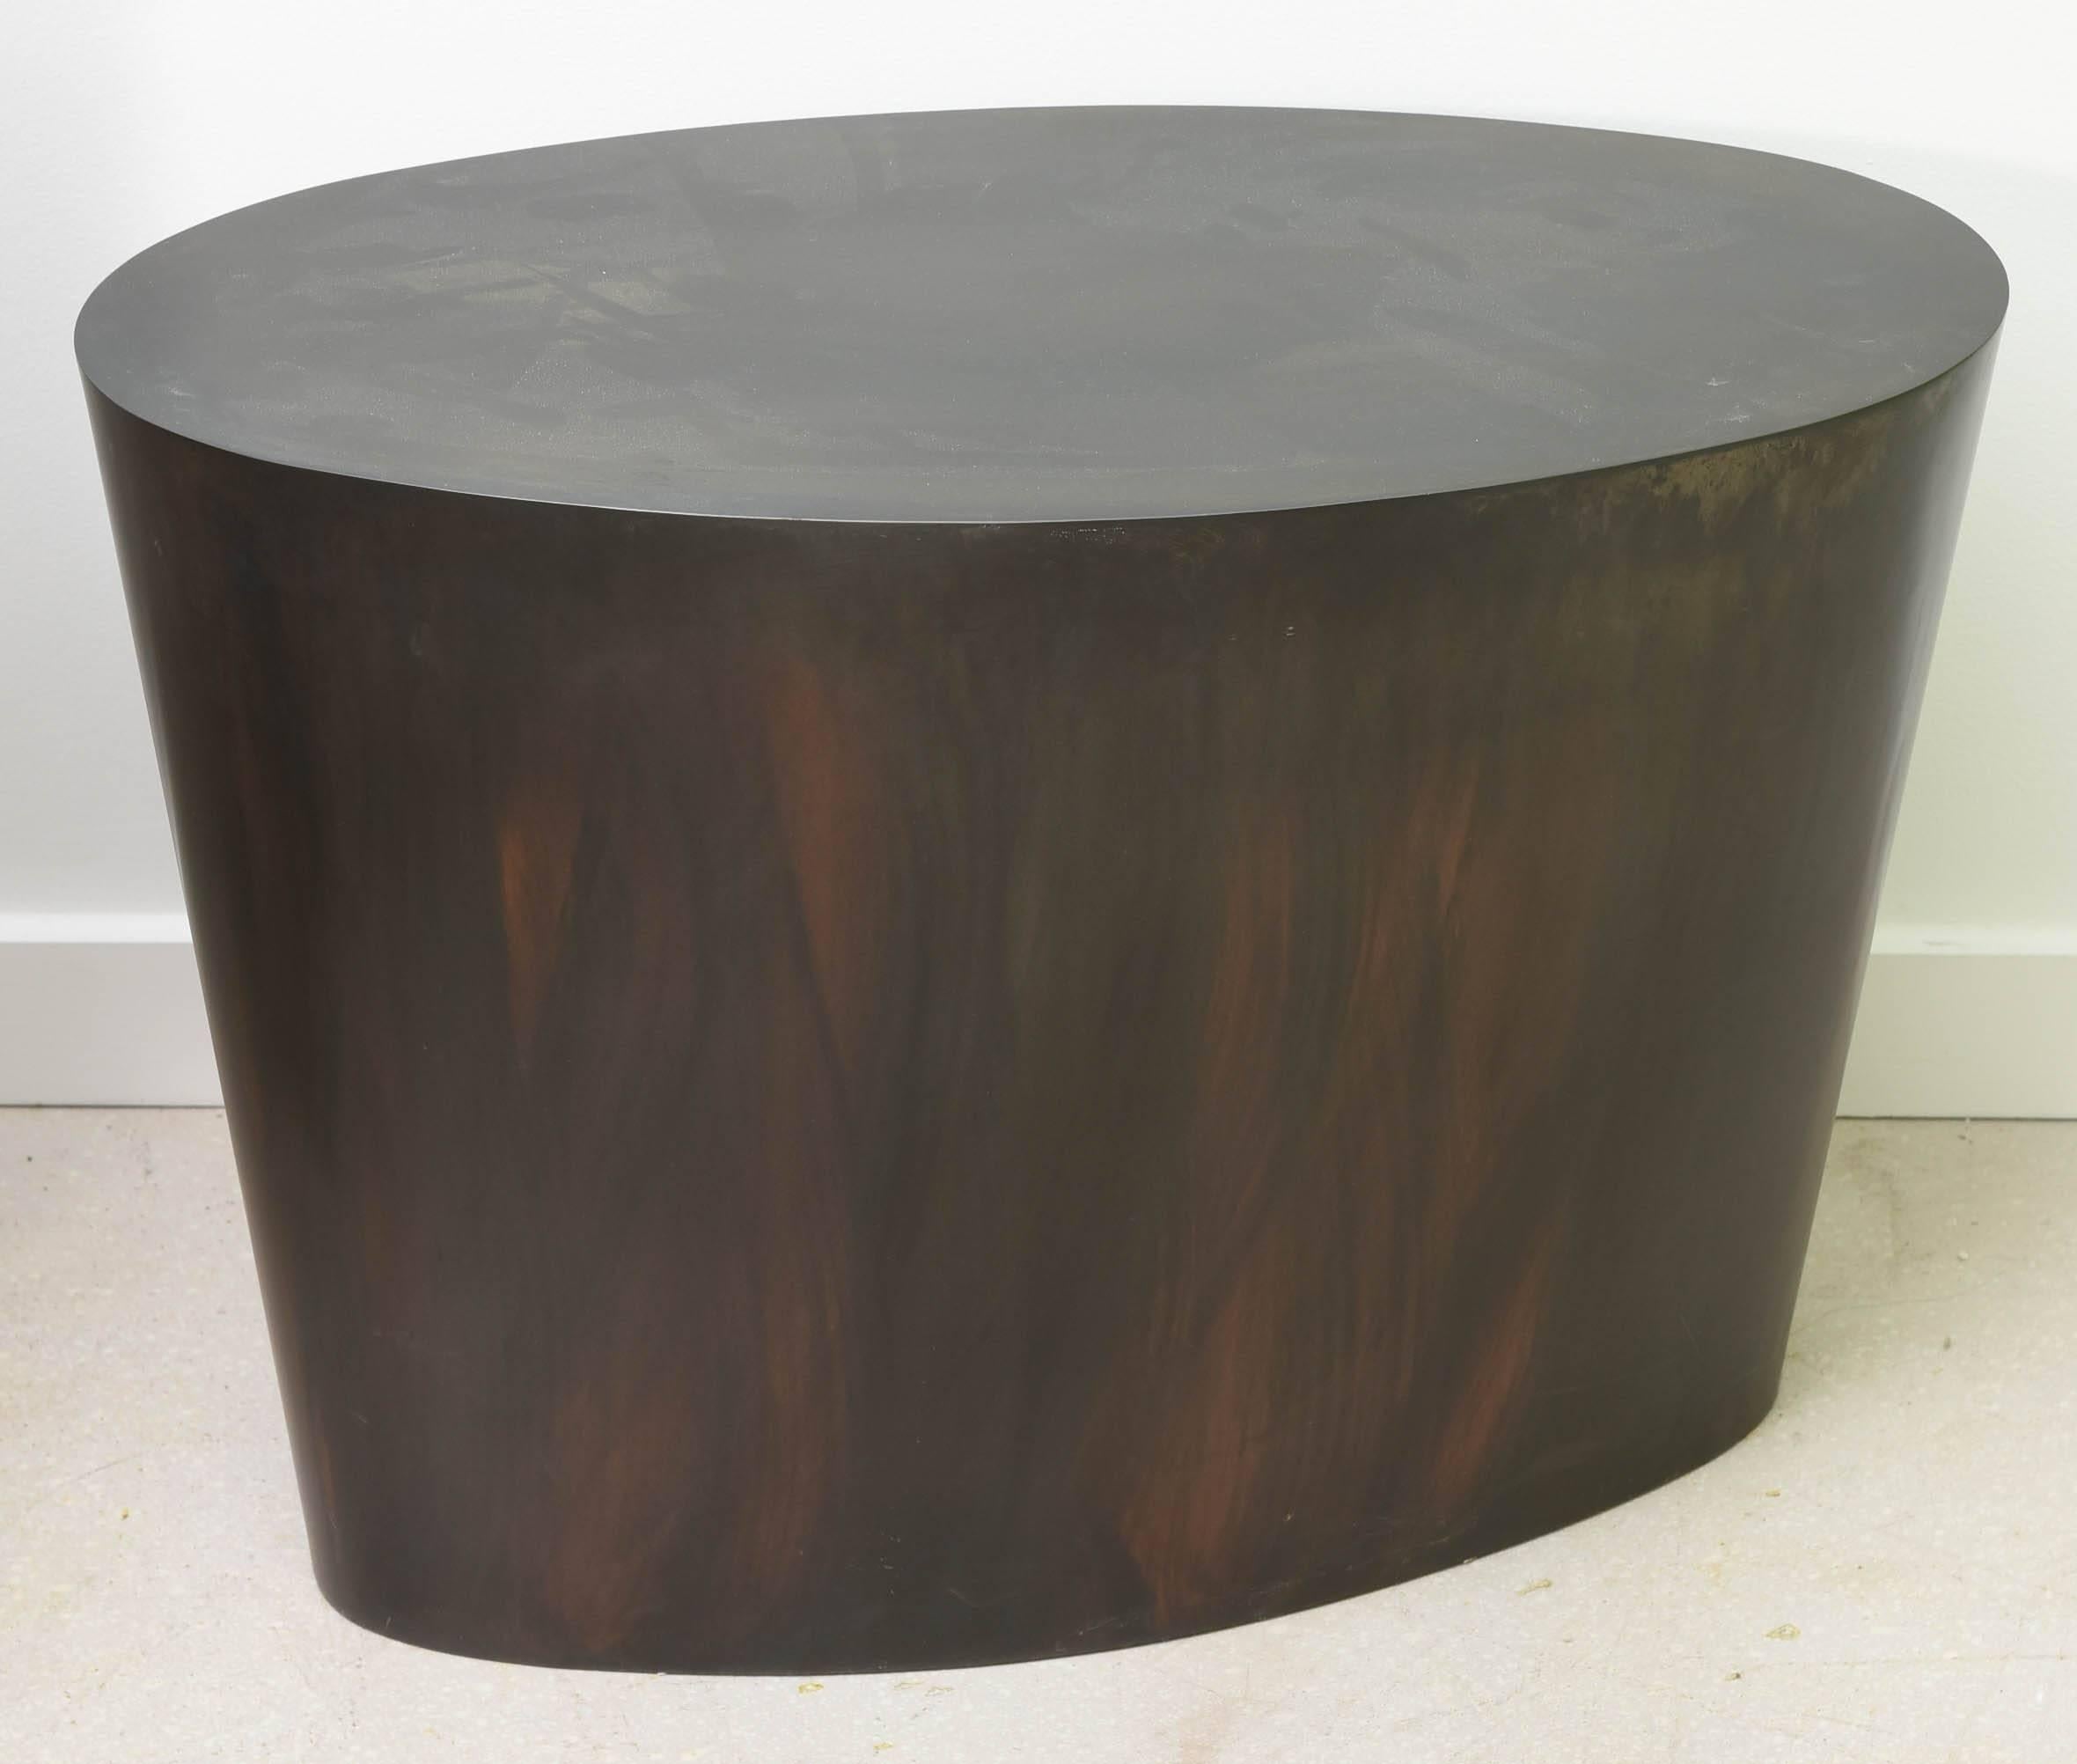 Sleek and modern steel table with bronze patina.